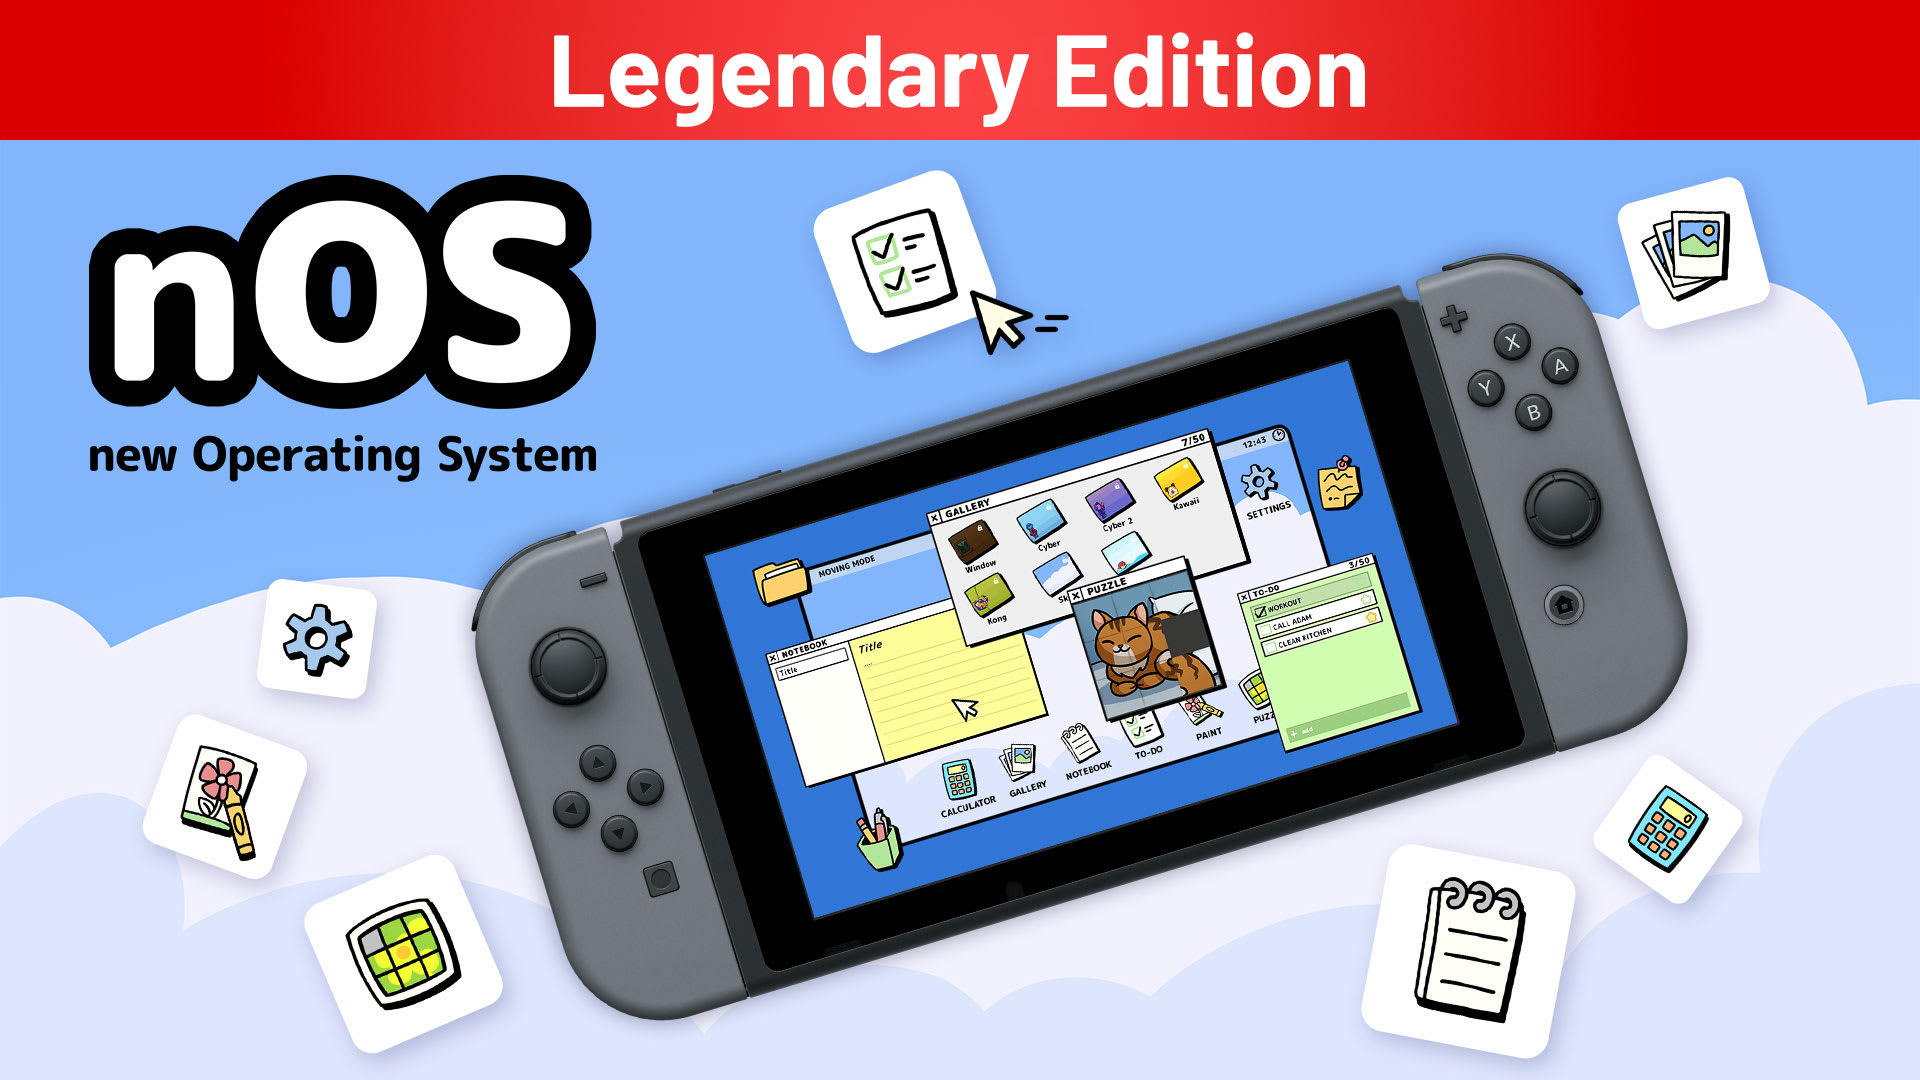 nOS new Operating System Legendary Edition